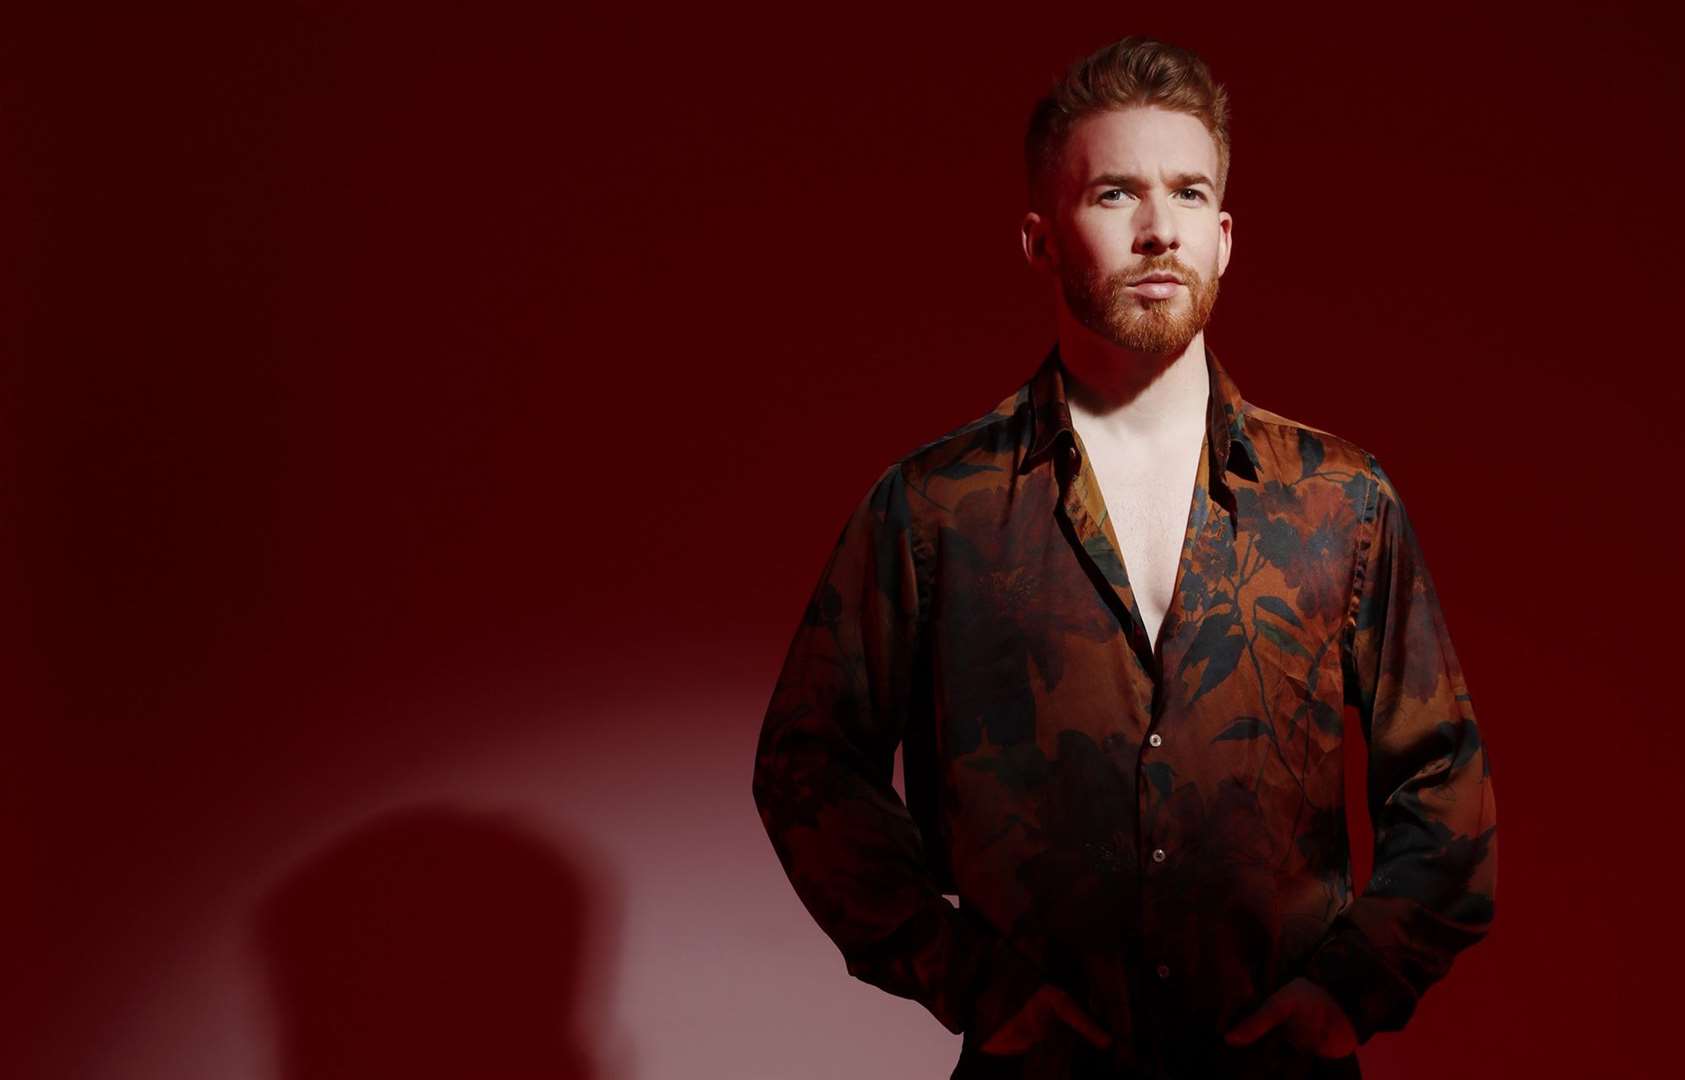 Neil Jones has been a professional dancer on Strictly since 2016